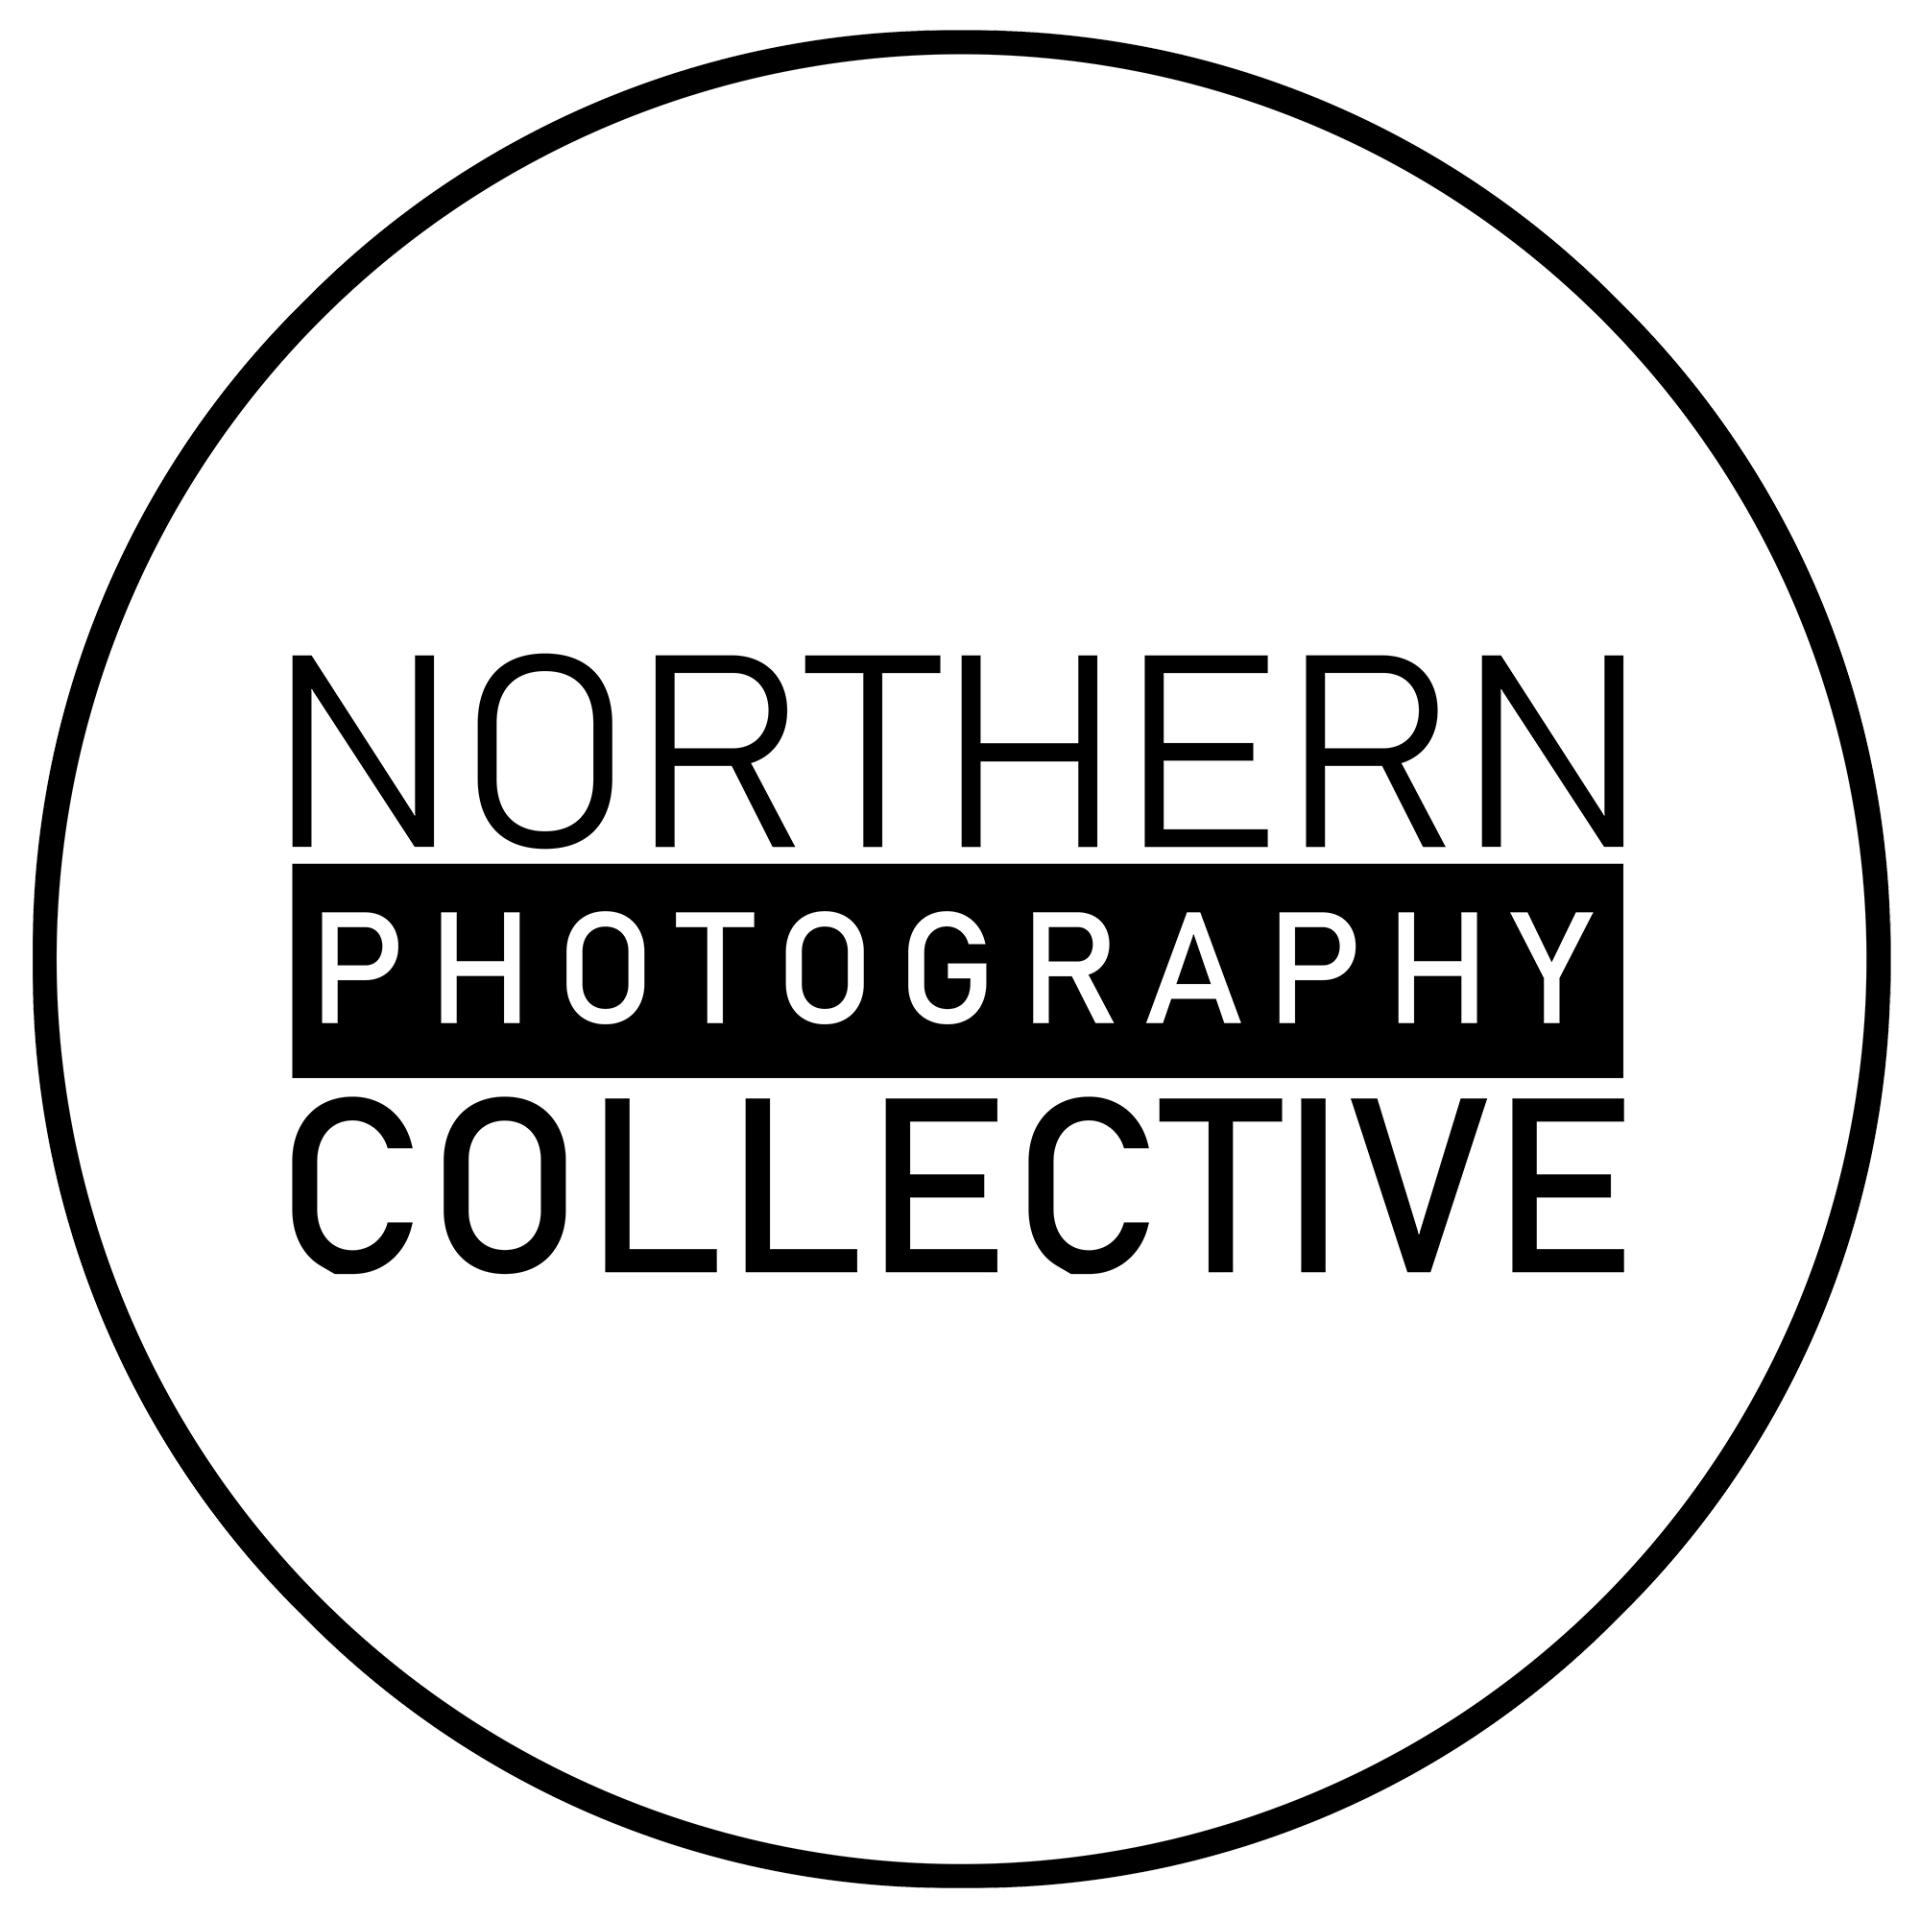 Northern Photography Collective